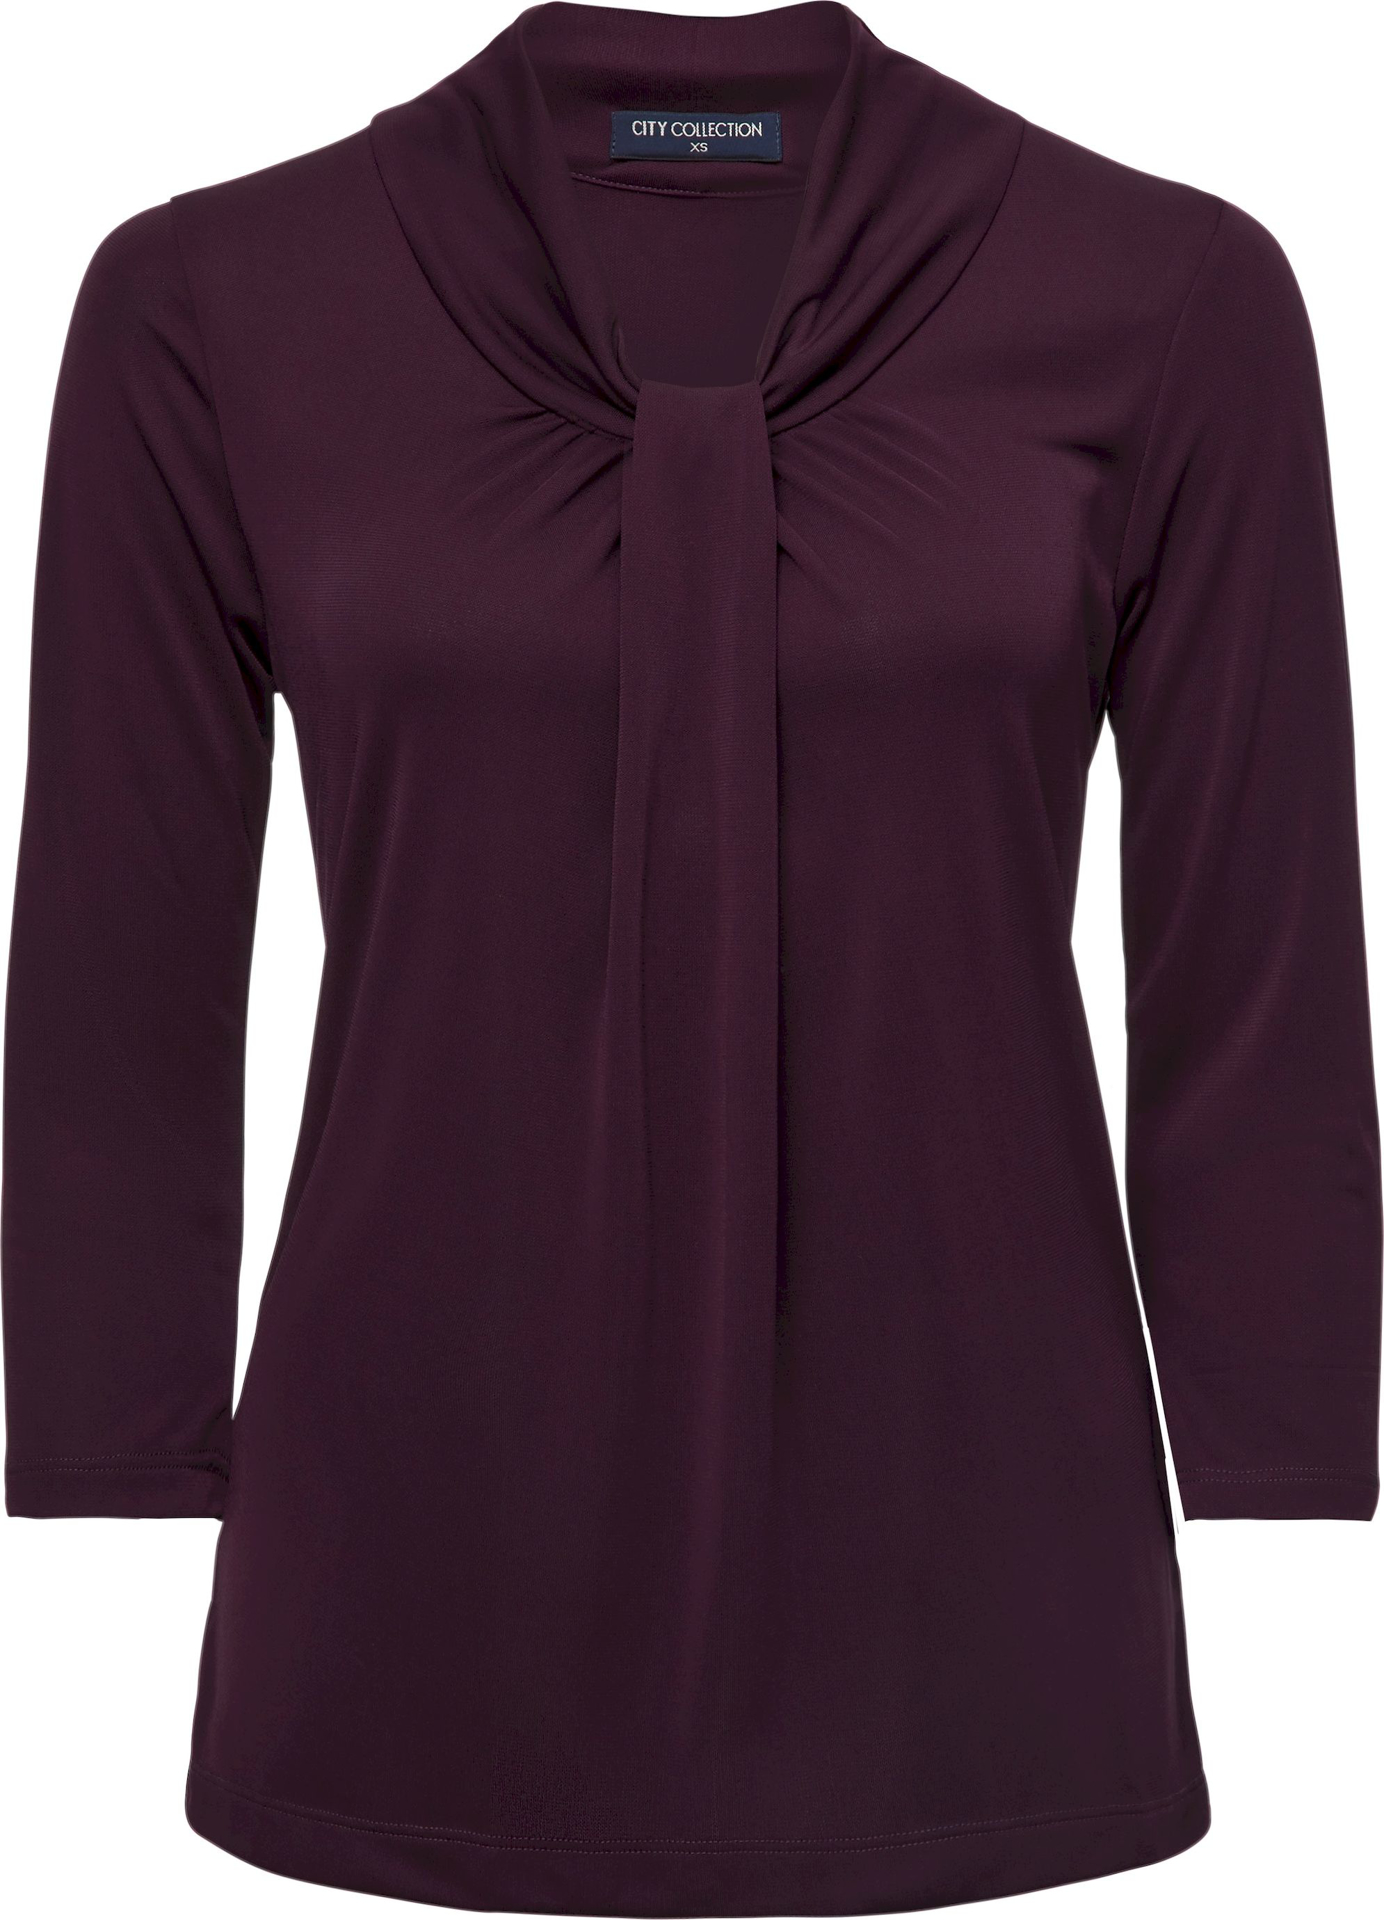 City Collection Pippa Knit 3/4 Sleeve Blouse (2221) | Scrubs, Corporate ...